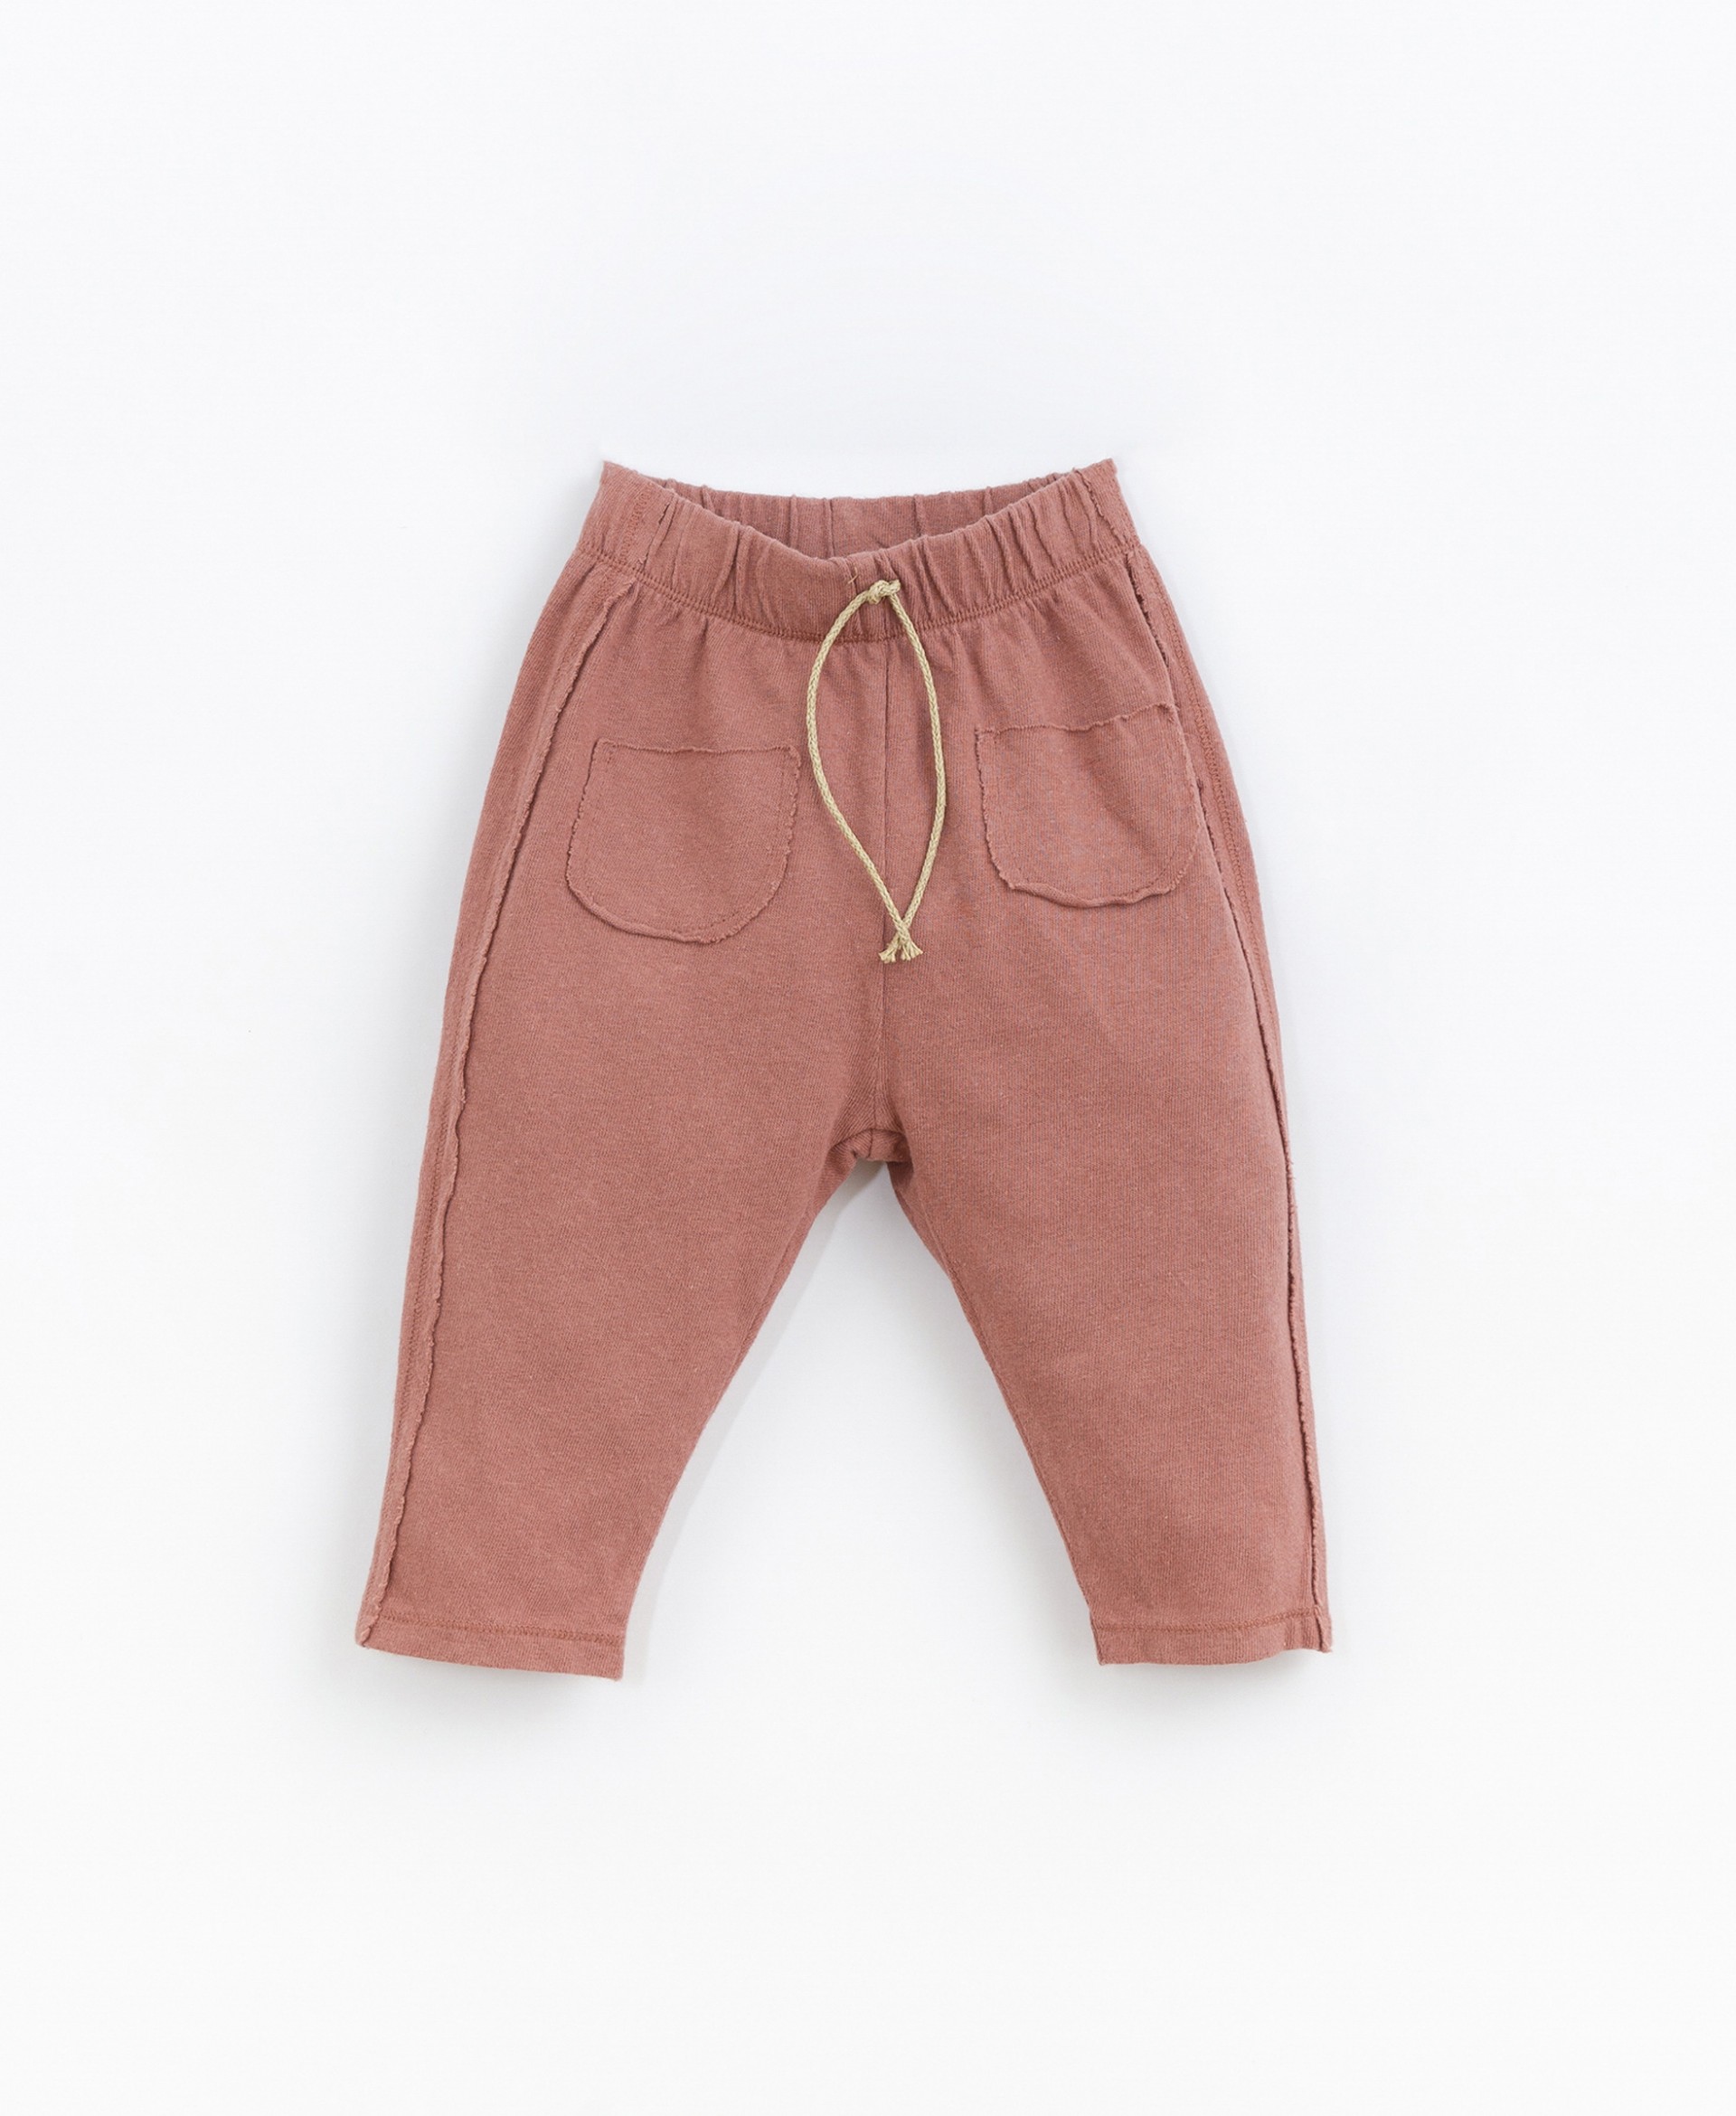 Pants with front pockets | Basketry